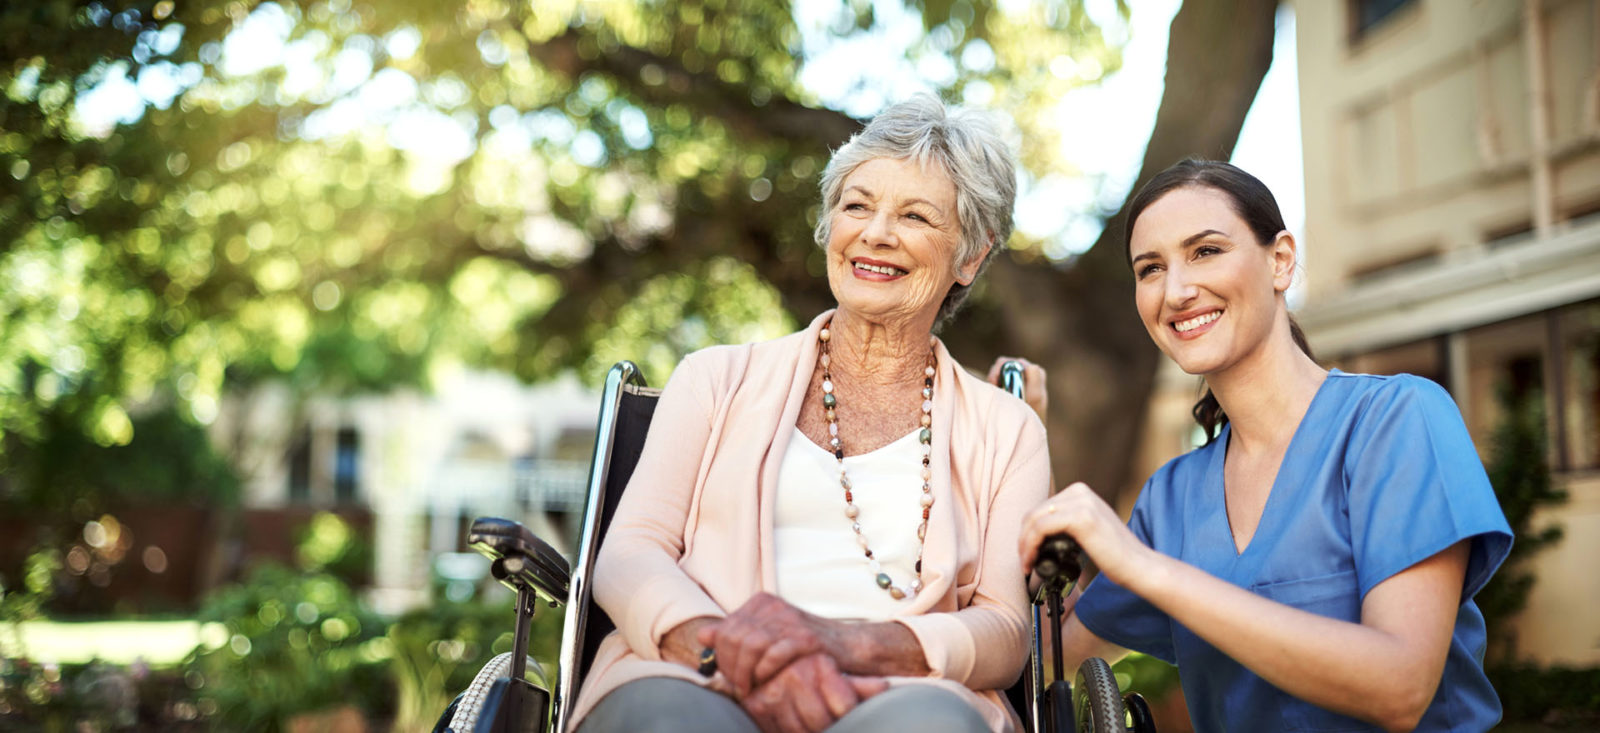 Shot of a young nurse spending time with a senior woman in a wheelchair in the garden